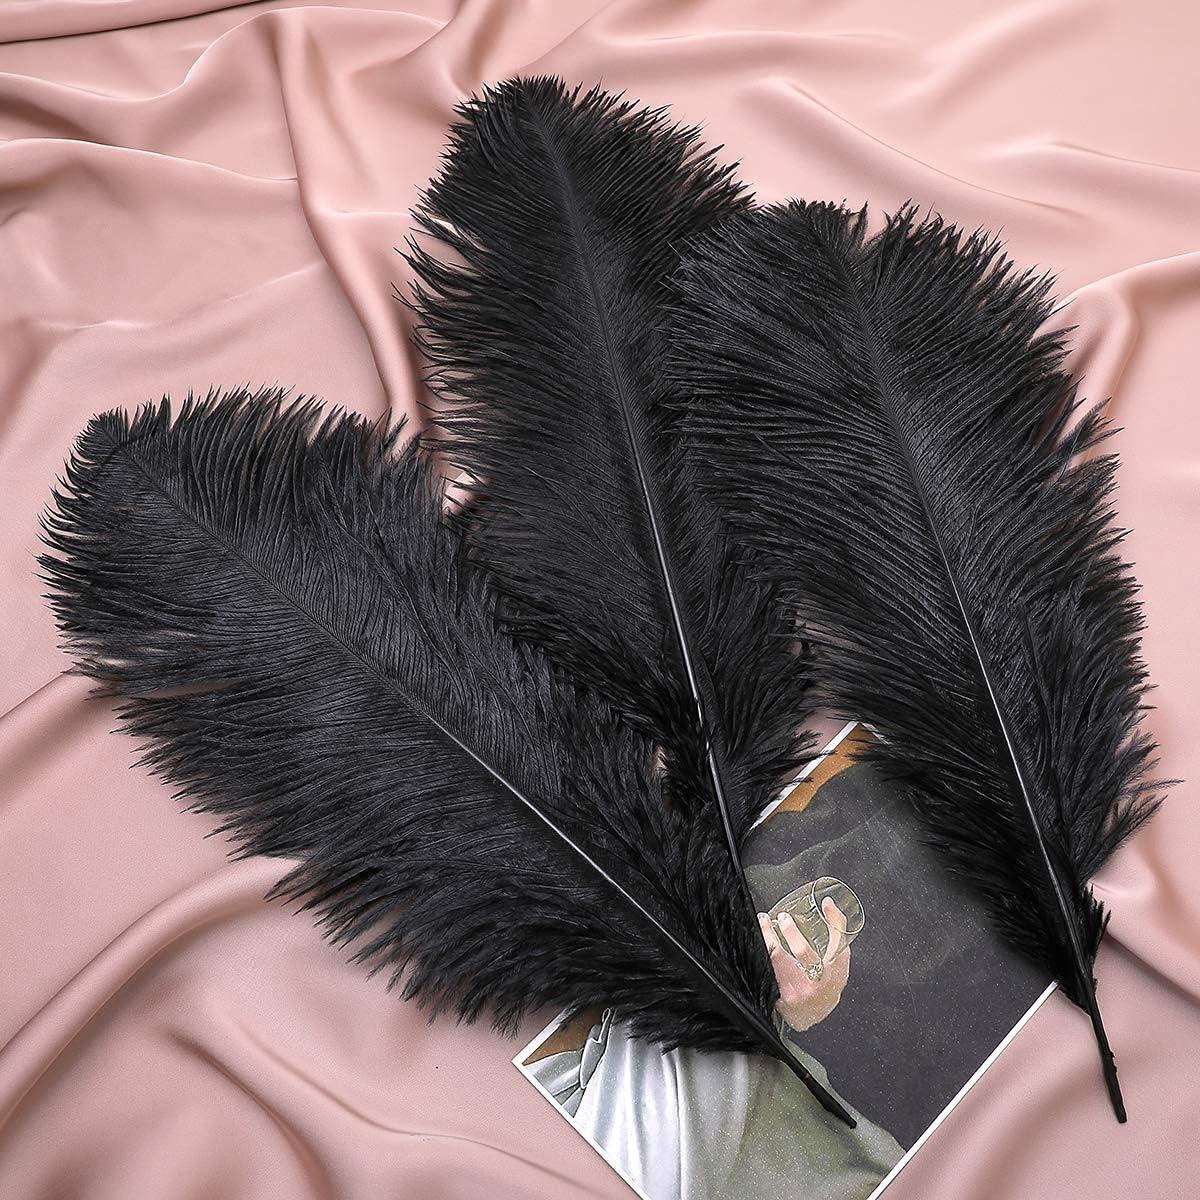 Doolland 10 Pcs Natural Black Ostrich Feathers 10-12 inch(25-30 cm) Bulk for DIY Wedding Party Centerpieces, Easter, Gatsby Decorations Feather